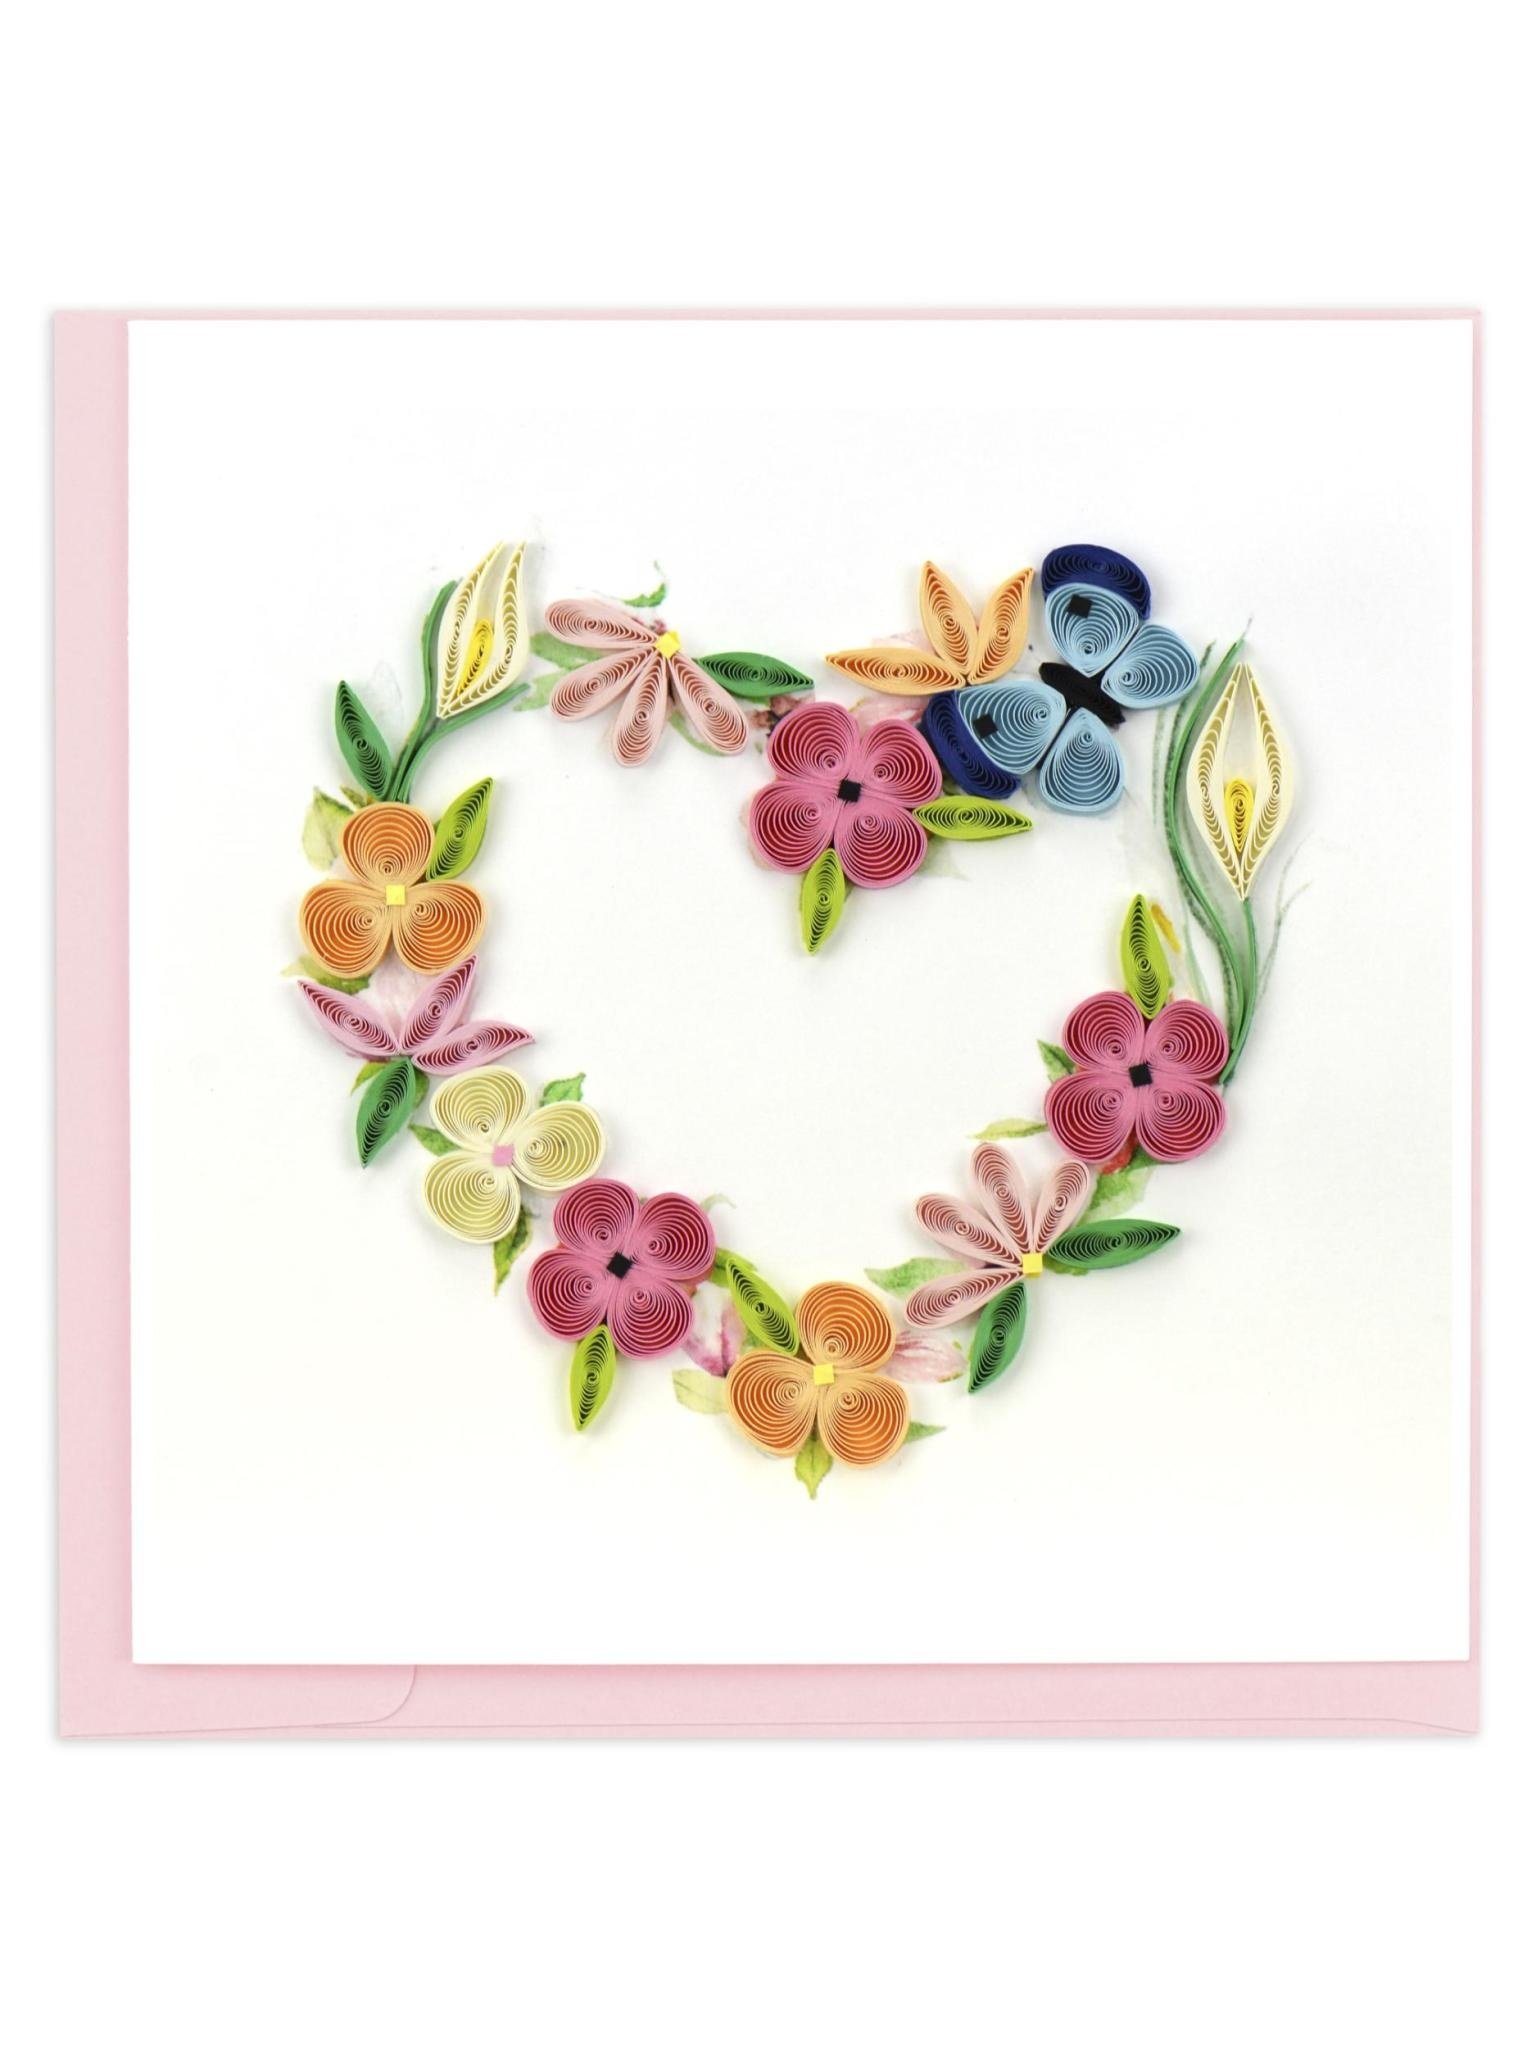 Quilling Card Floral Heart Wreath